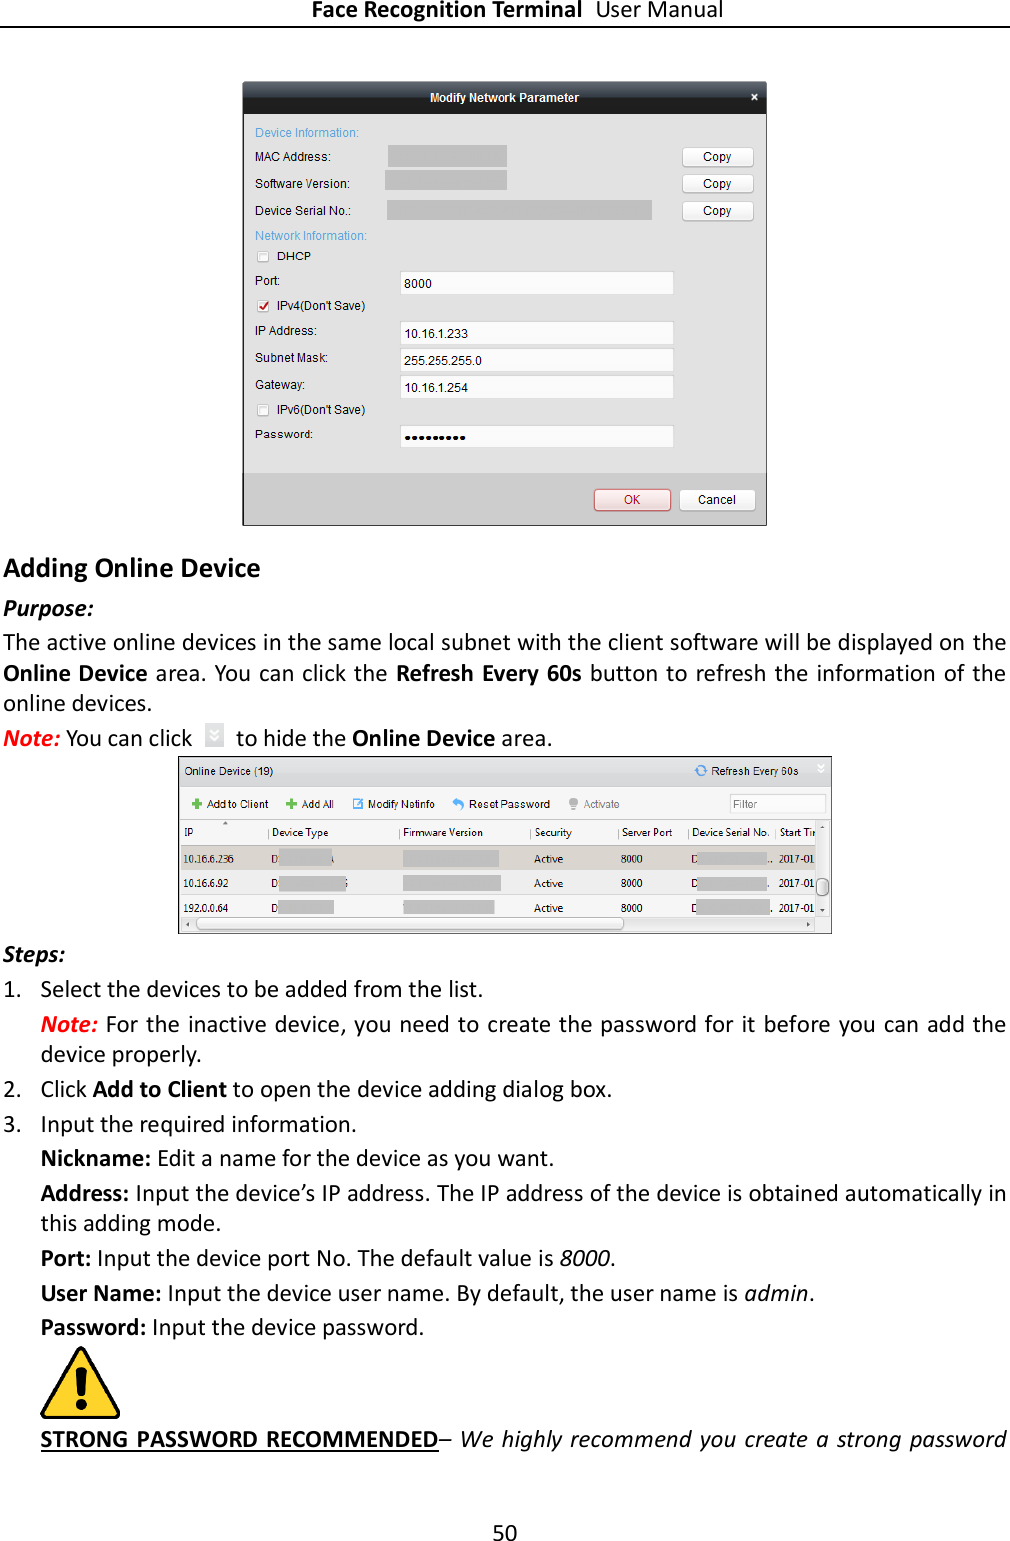 Face Recognition Terminal User Manual 50   Adding Online Device Purpose: The active online devices in the same local subnet with the client software will be displayed on the Online Device area. You can click the Refresh Every 60s button to refresh the information of the online devices. Note: You can click    to hide the Online Device area.  Steps:  1. Select the devices to be added from the list. Note: For the inactive device, you need to create the password for it before you can add the device properly.   2. Click Add to Client to open the device adding dialog box. 3. Input the required information. Nickname: Edit a name for the device as you want. Address: Input the device’s IP address. The IP address of the device is obtained automatically in this adding mode. Port: Input the device port No. The default value is 8000. User Name: Input the device user name. By default, the user name is admin. Password: Input the device password.  STRONG  PASSWORD RECOMMENDED– We highly recommend you create a strong password 